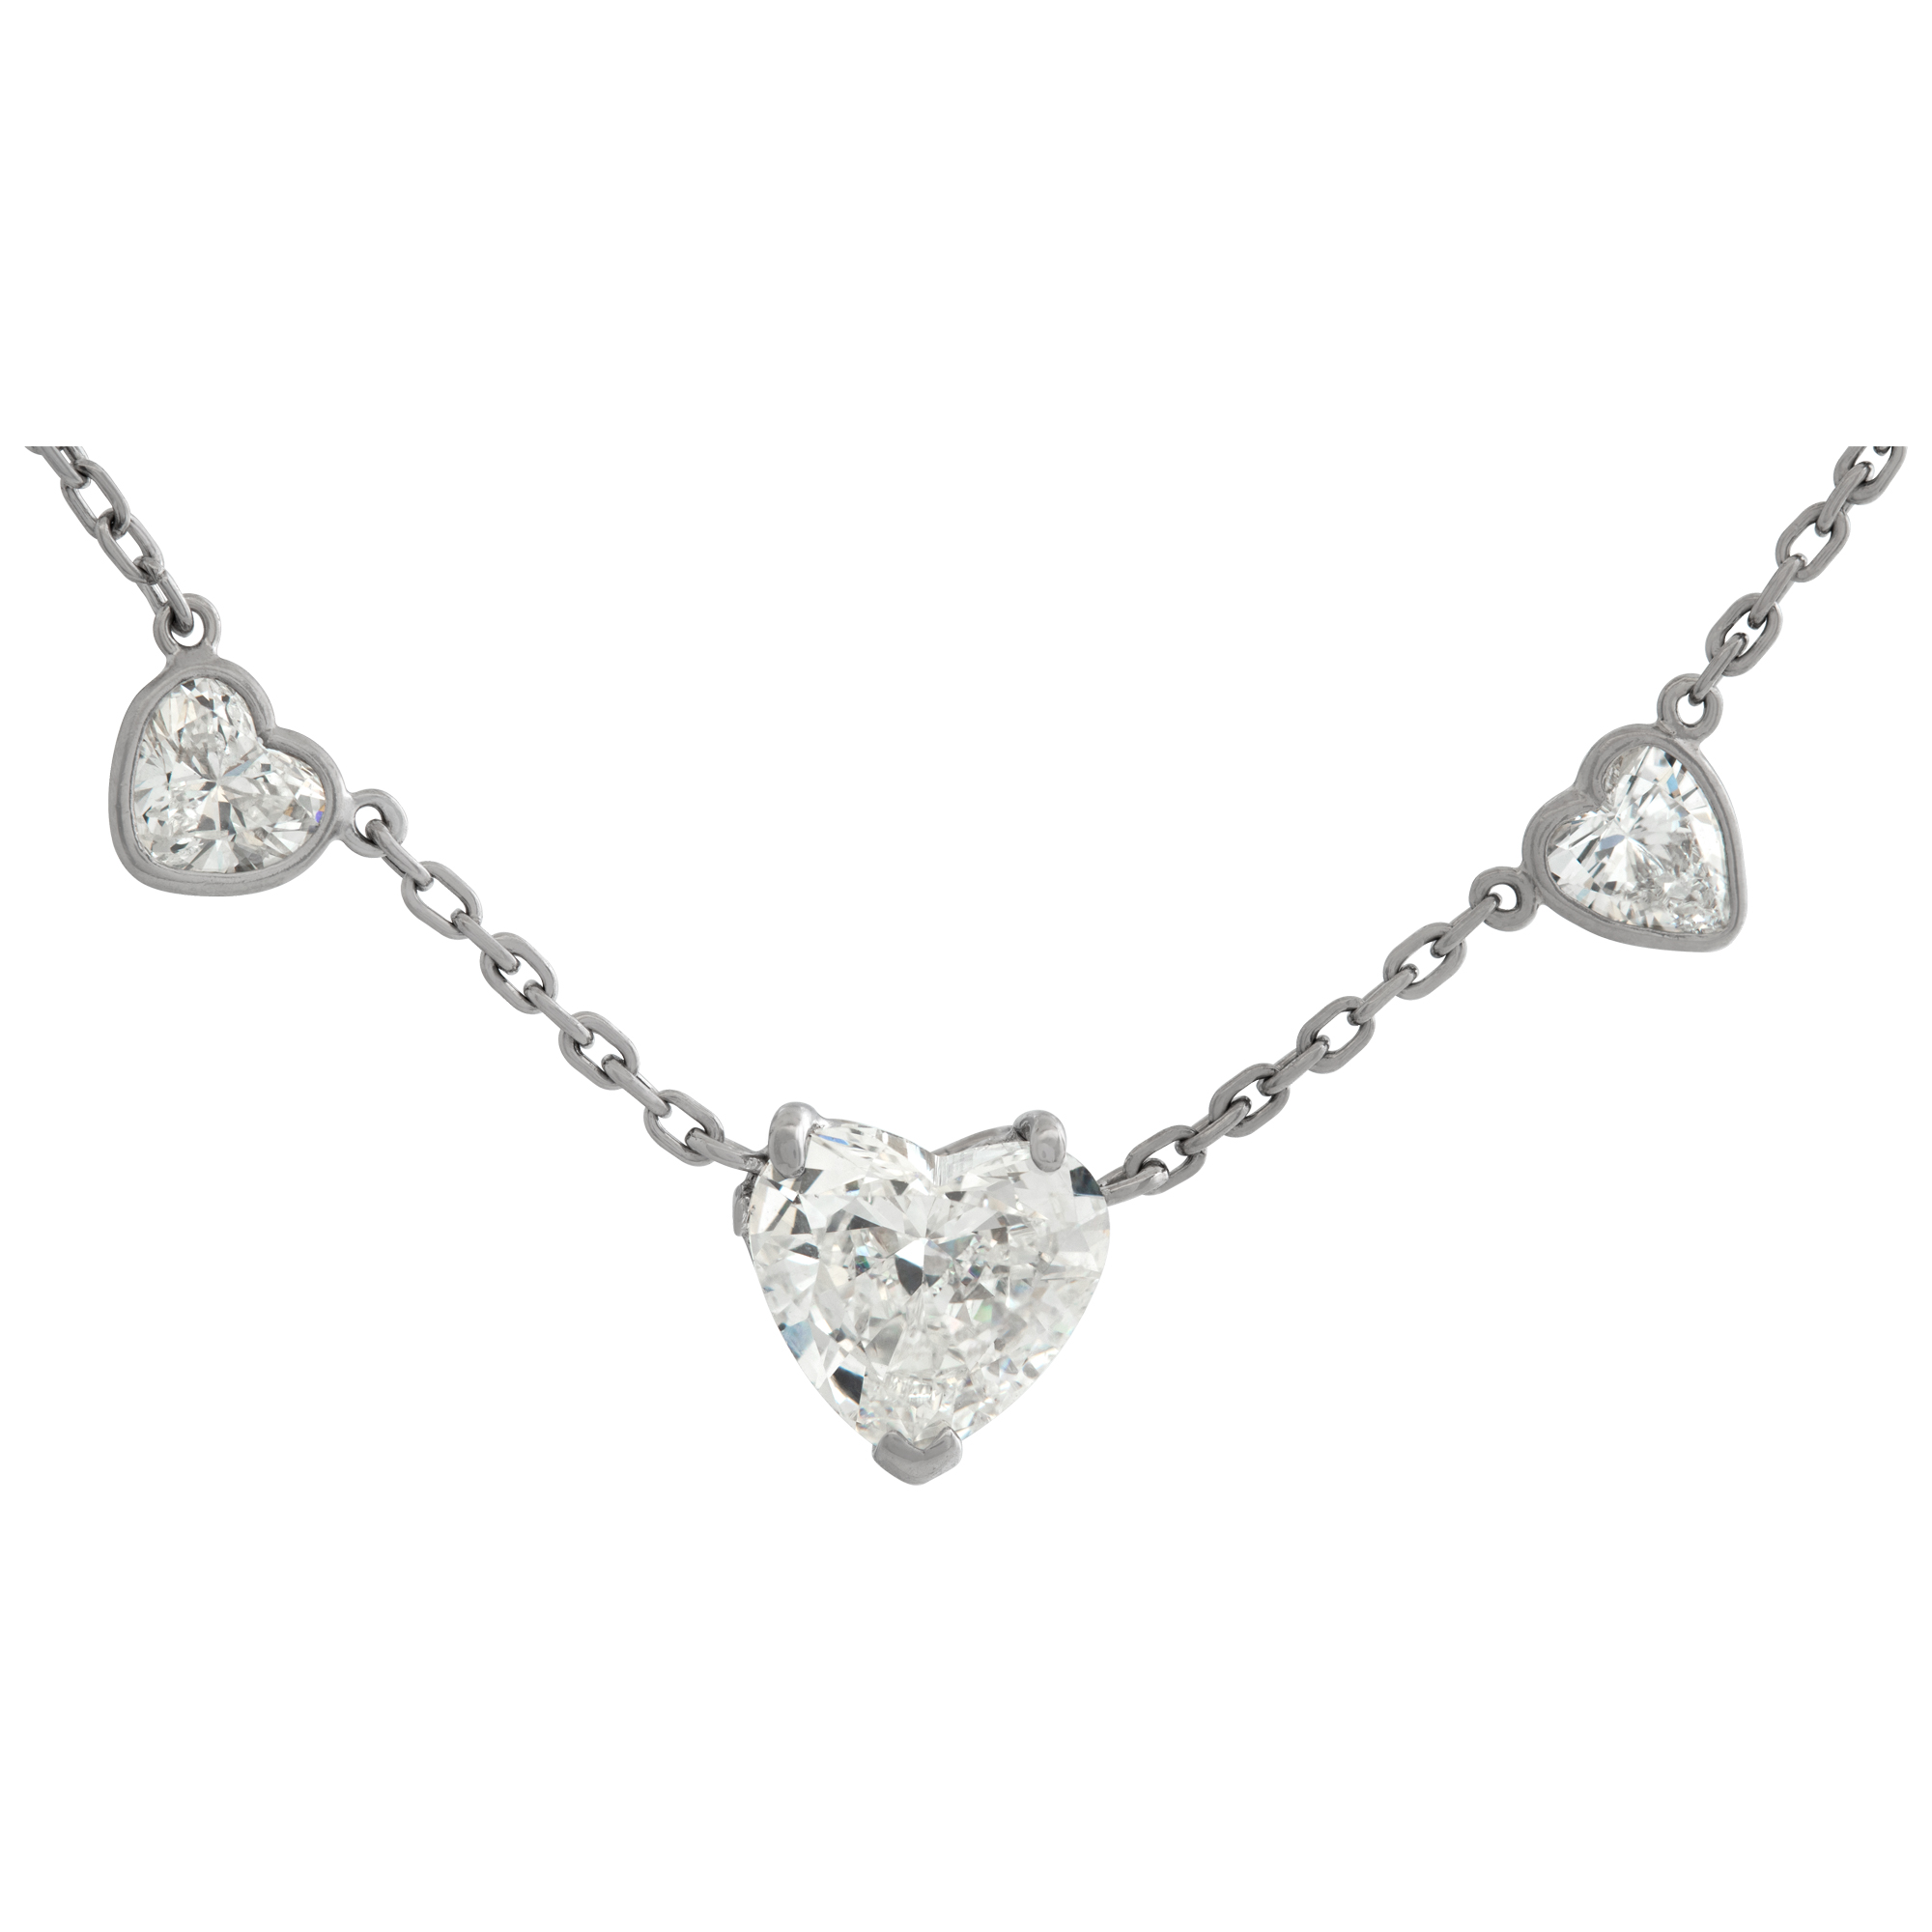 GIA certified heart shaped diamond 1.90 carat ( G color, SI1 clarity) necklace on 14k white gold cha image 1